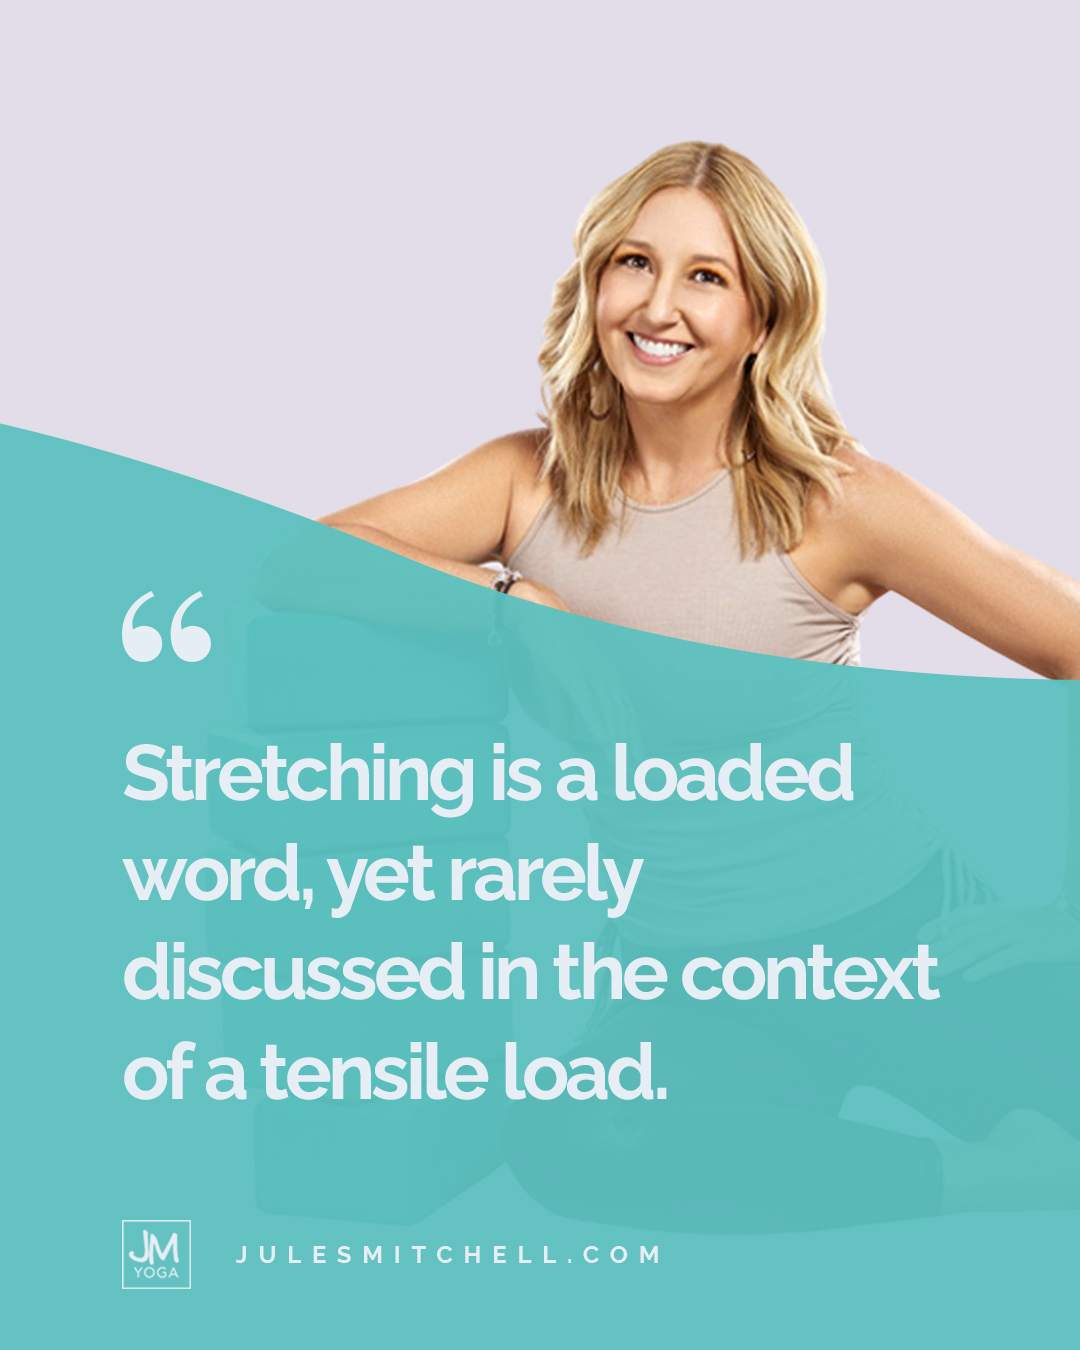 Stretching is a loaded word, yet rarely discussed in the context of a tensile load